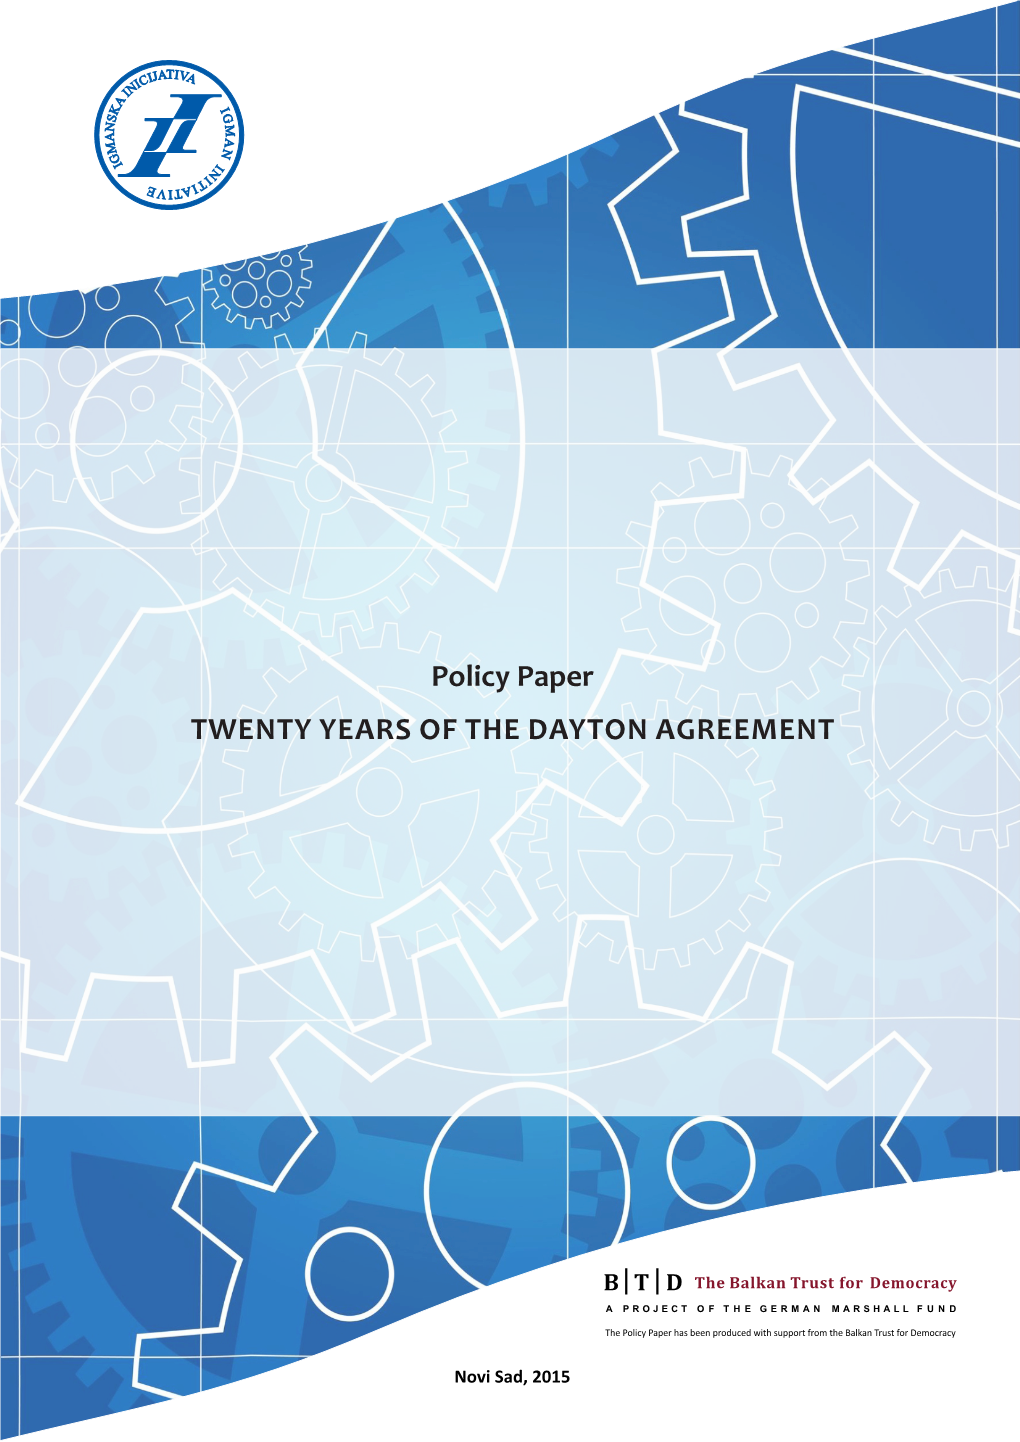 Policy Paper TWENTY YEARS of the DAYTON AGREEMENT